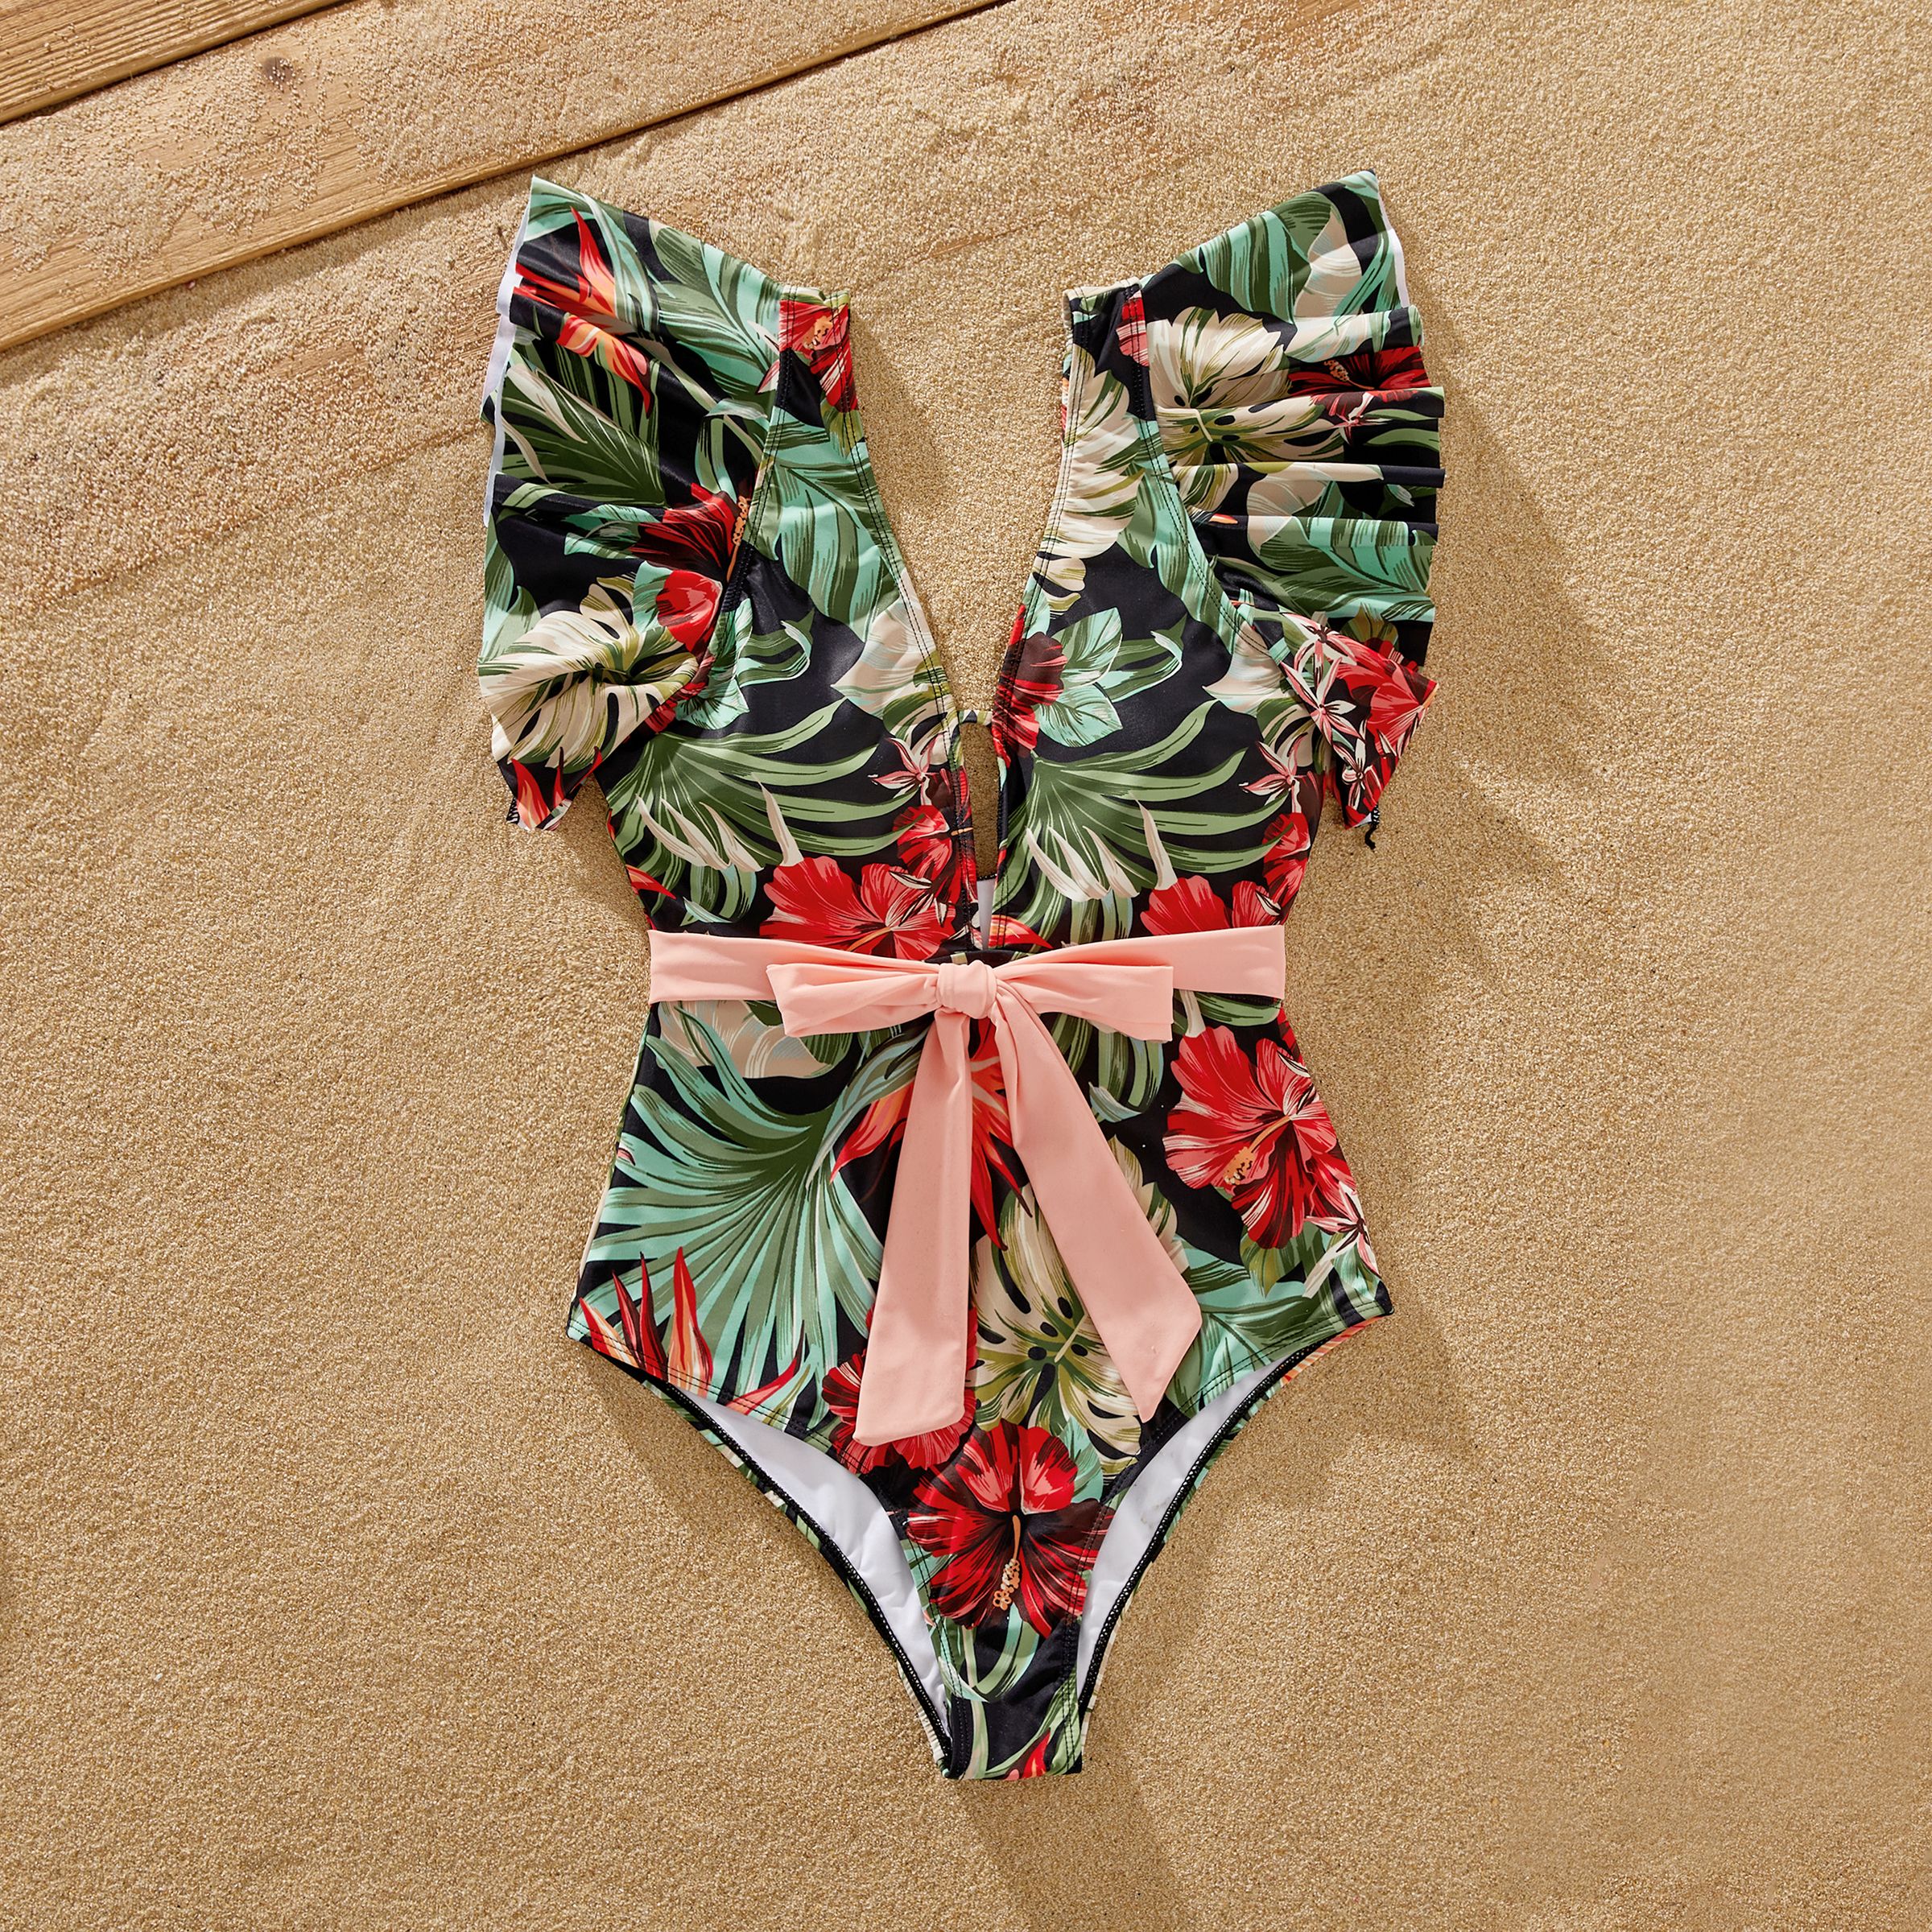 Family Matching Allover Floral Print Swim Trunks Shorts And Ruffle Belted One-Piece Swimsuit